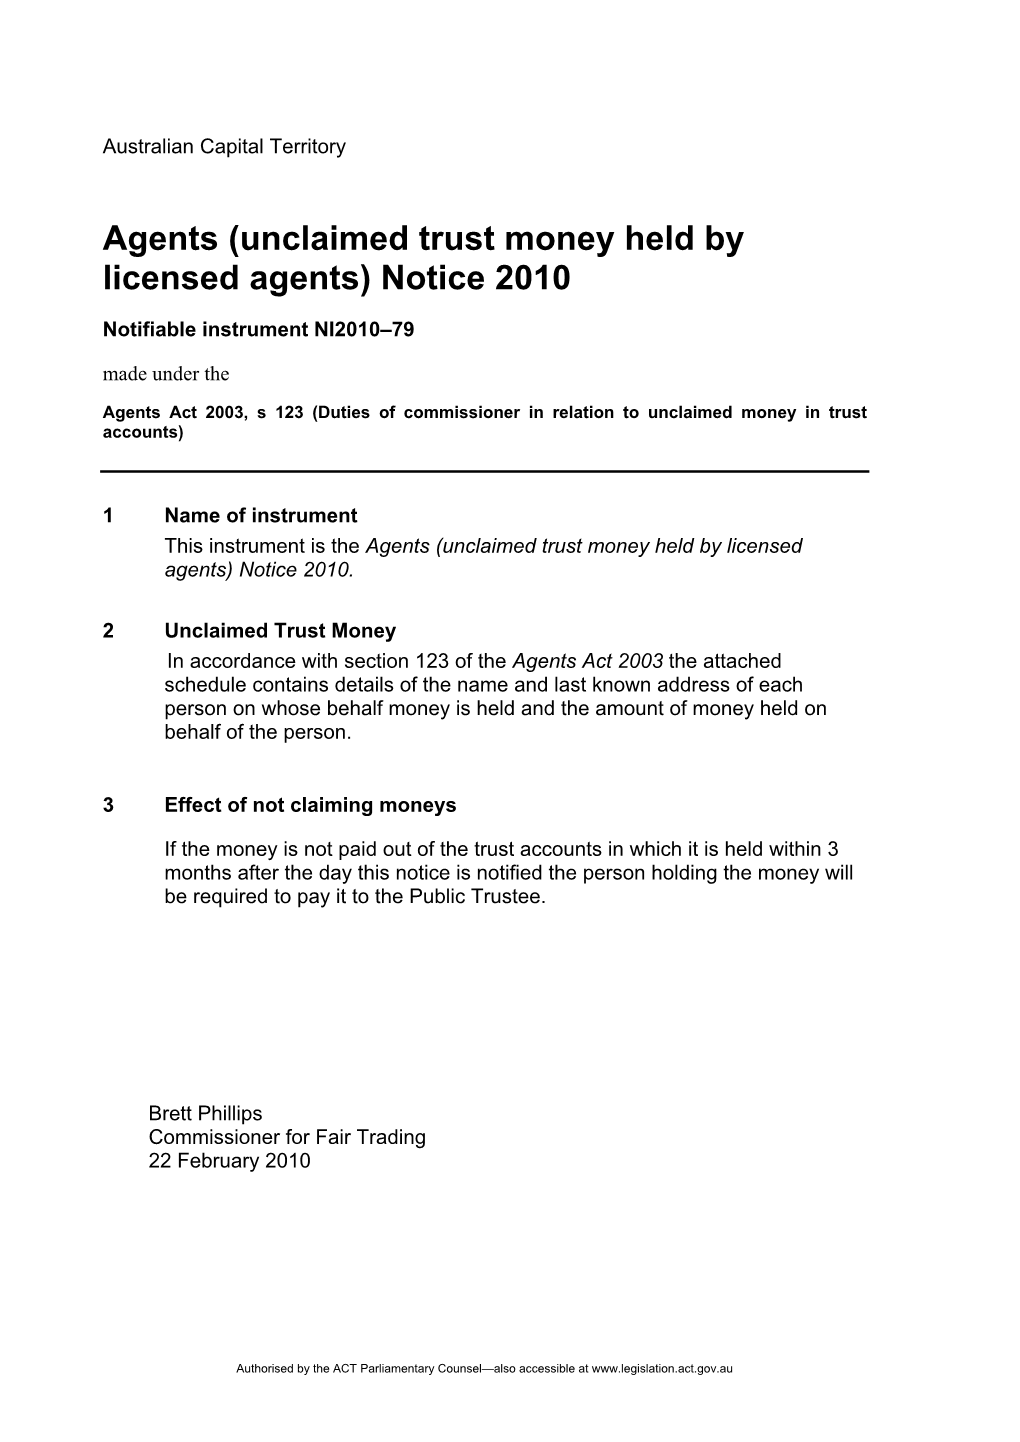 (Unclaimed Trust Money Held by Licensed Agents) Notice 2010